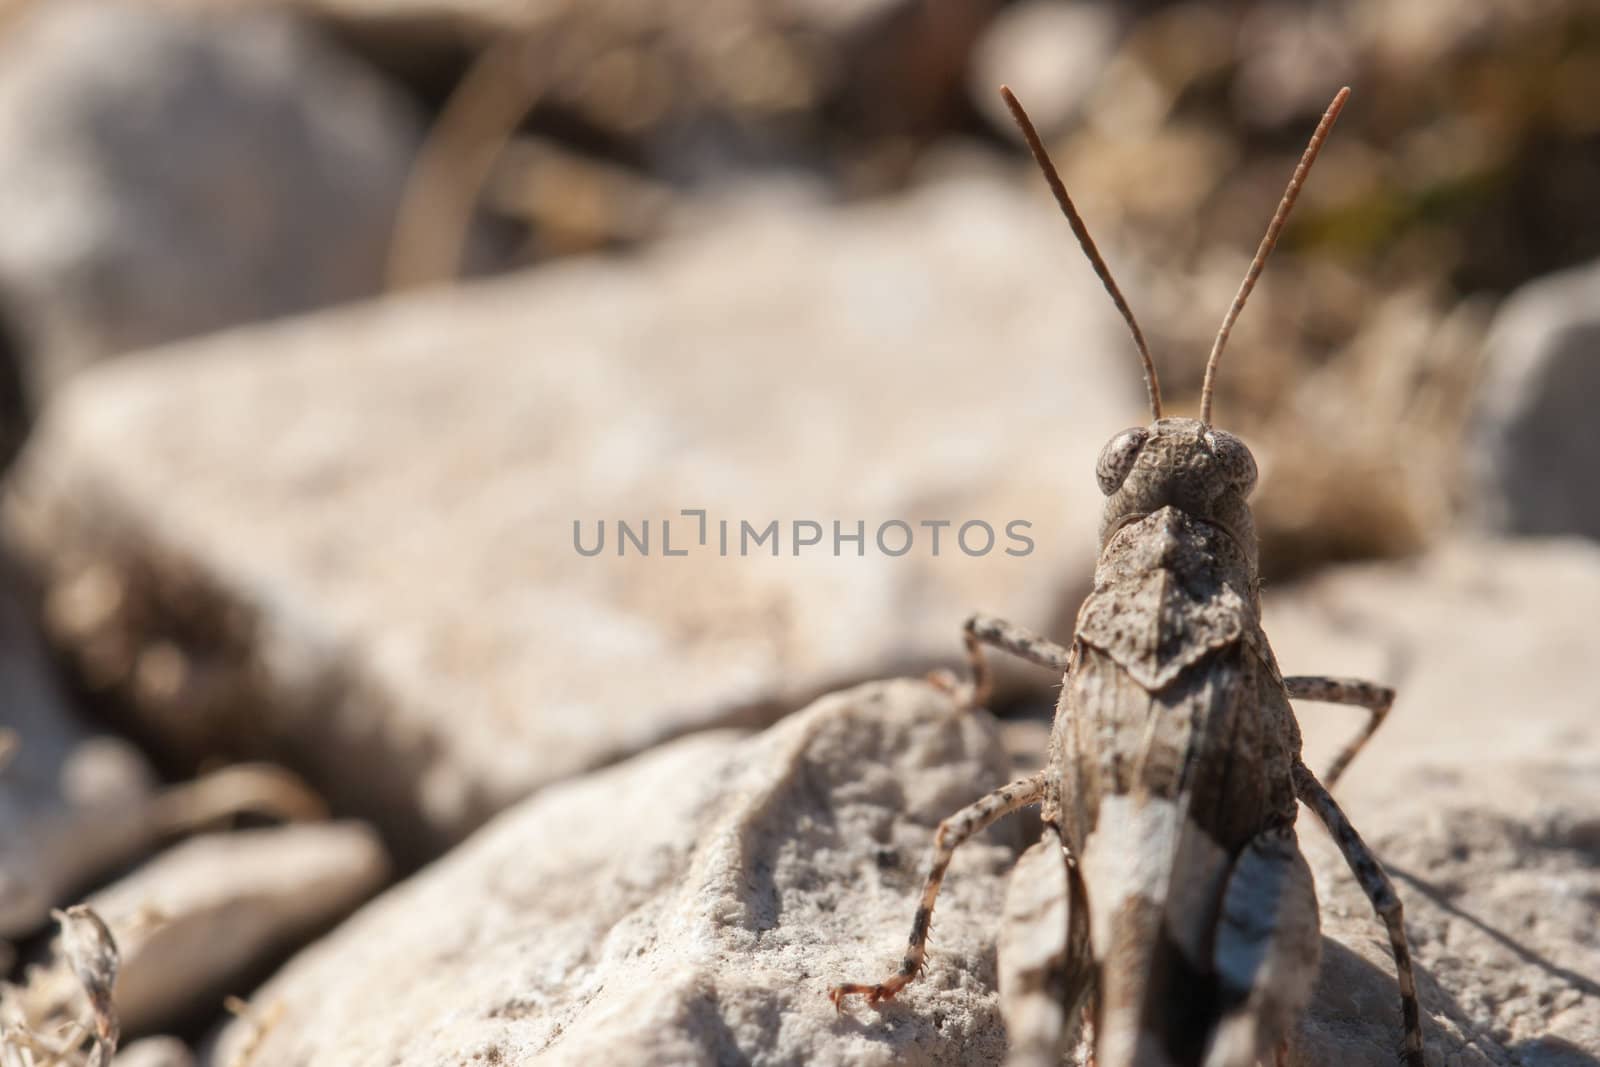 Brown locust close up full body side view (Oedipoda carulescens)